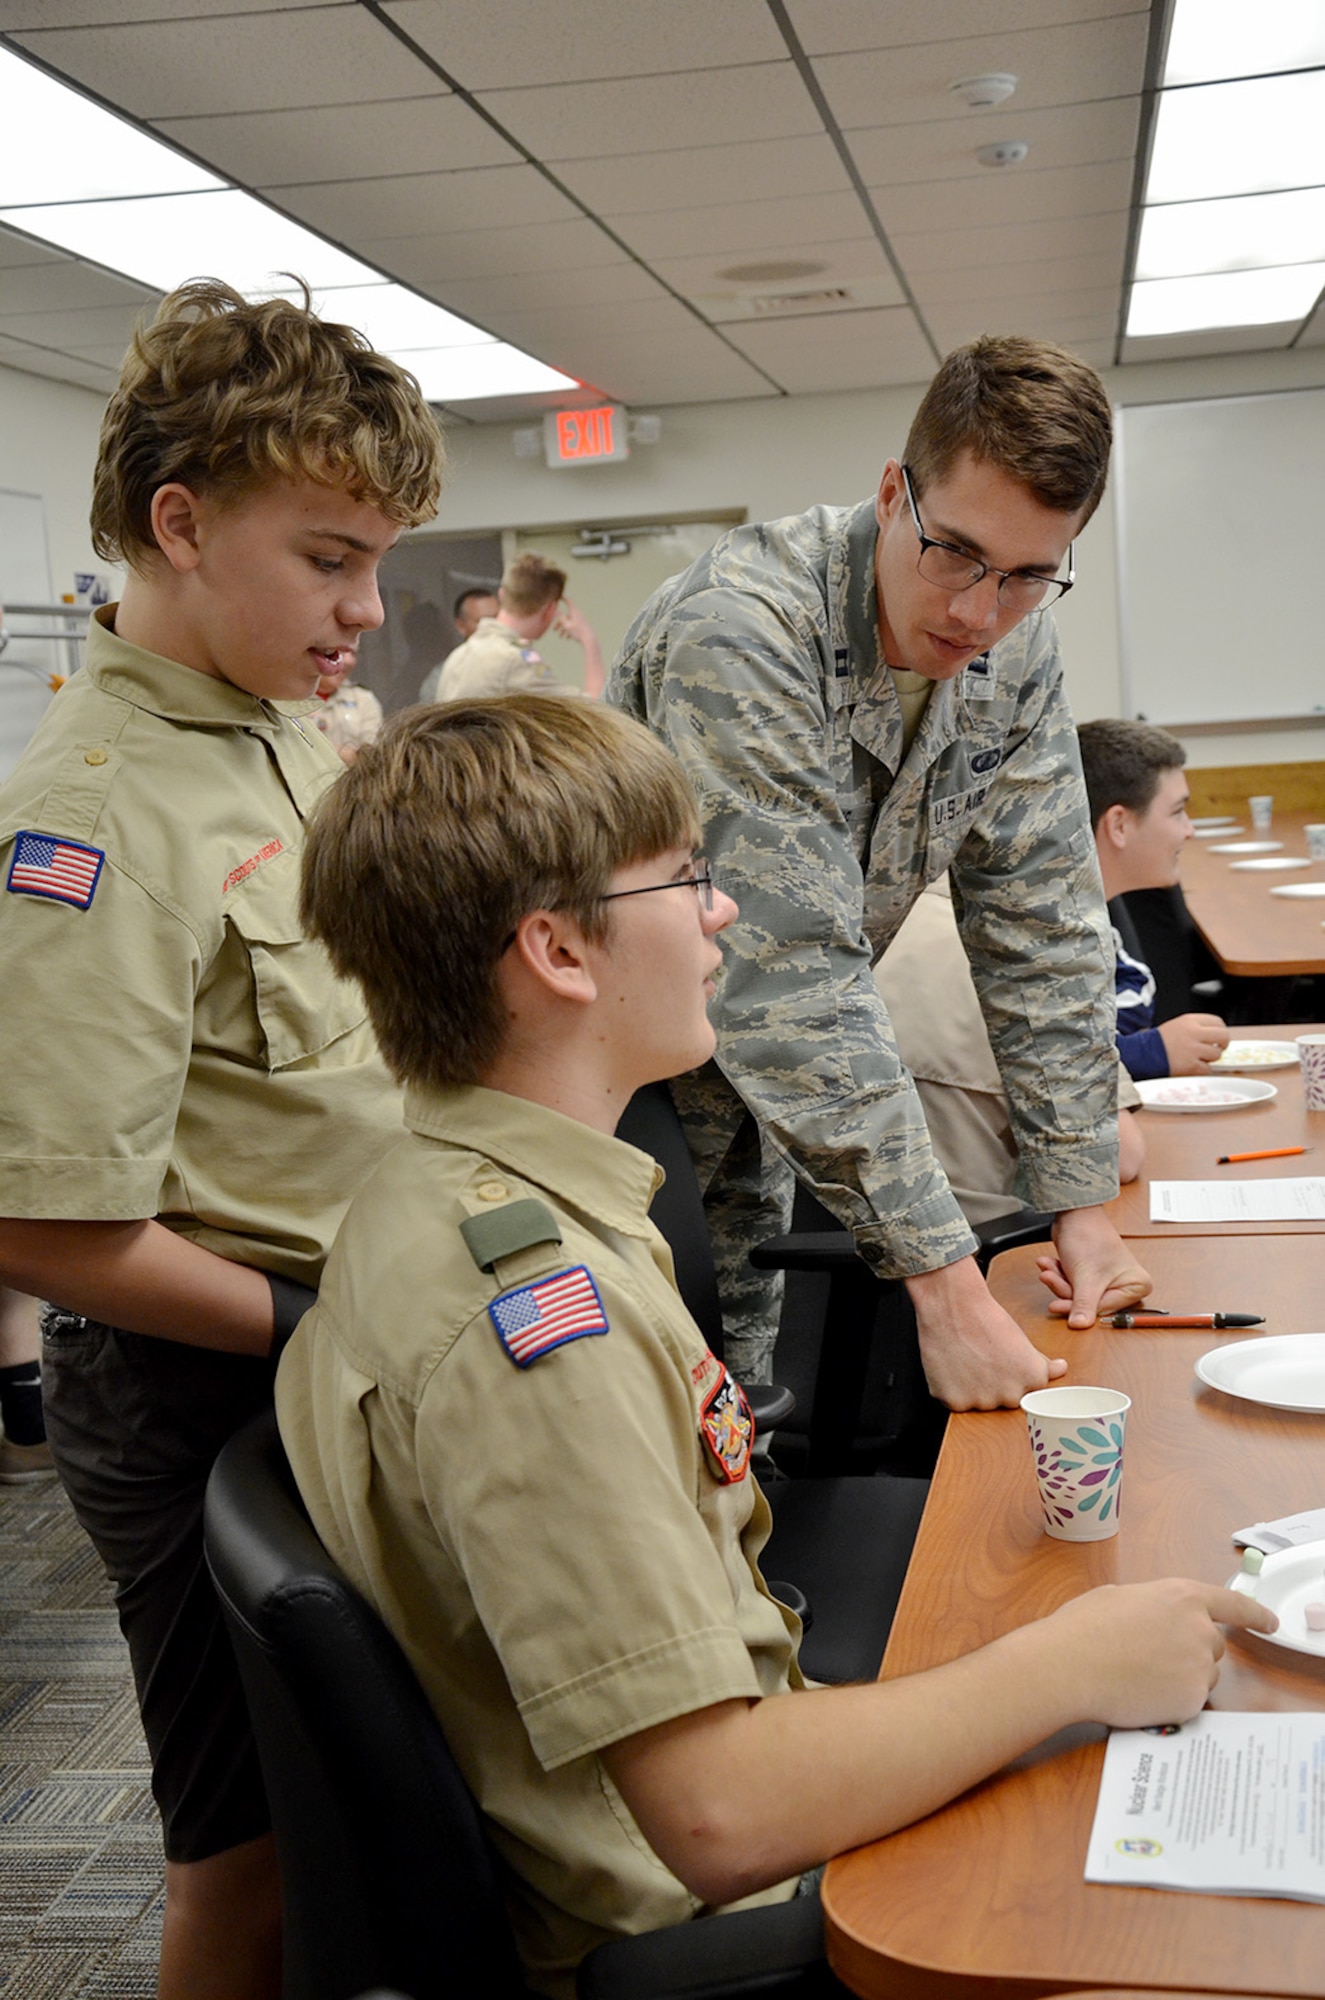 Capt. Jason Goins, a scientist with the Air Force Technical Applications Center, helps Boy Scouts Daniel Kirchhof, a 9th grader at University High School in Orlando, and Ethan Jesse, an 8th grader from Innovation Middle School in Orlando, during a Boy Scout Merit event hosted by the nuclear treaty monitoring center at Patrick AFB, Fla., March 31, 2018.  Goins was one of several Airmen from AFTAC who volunteered to help troops earn the badge.  (U.S. Air Force photo by Susan A. Romano)